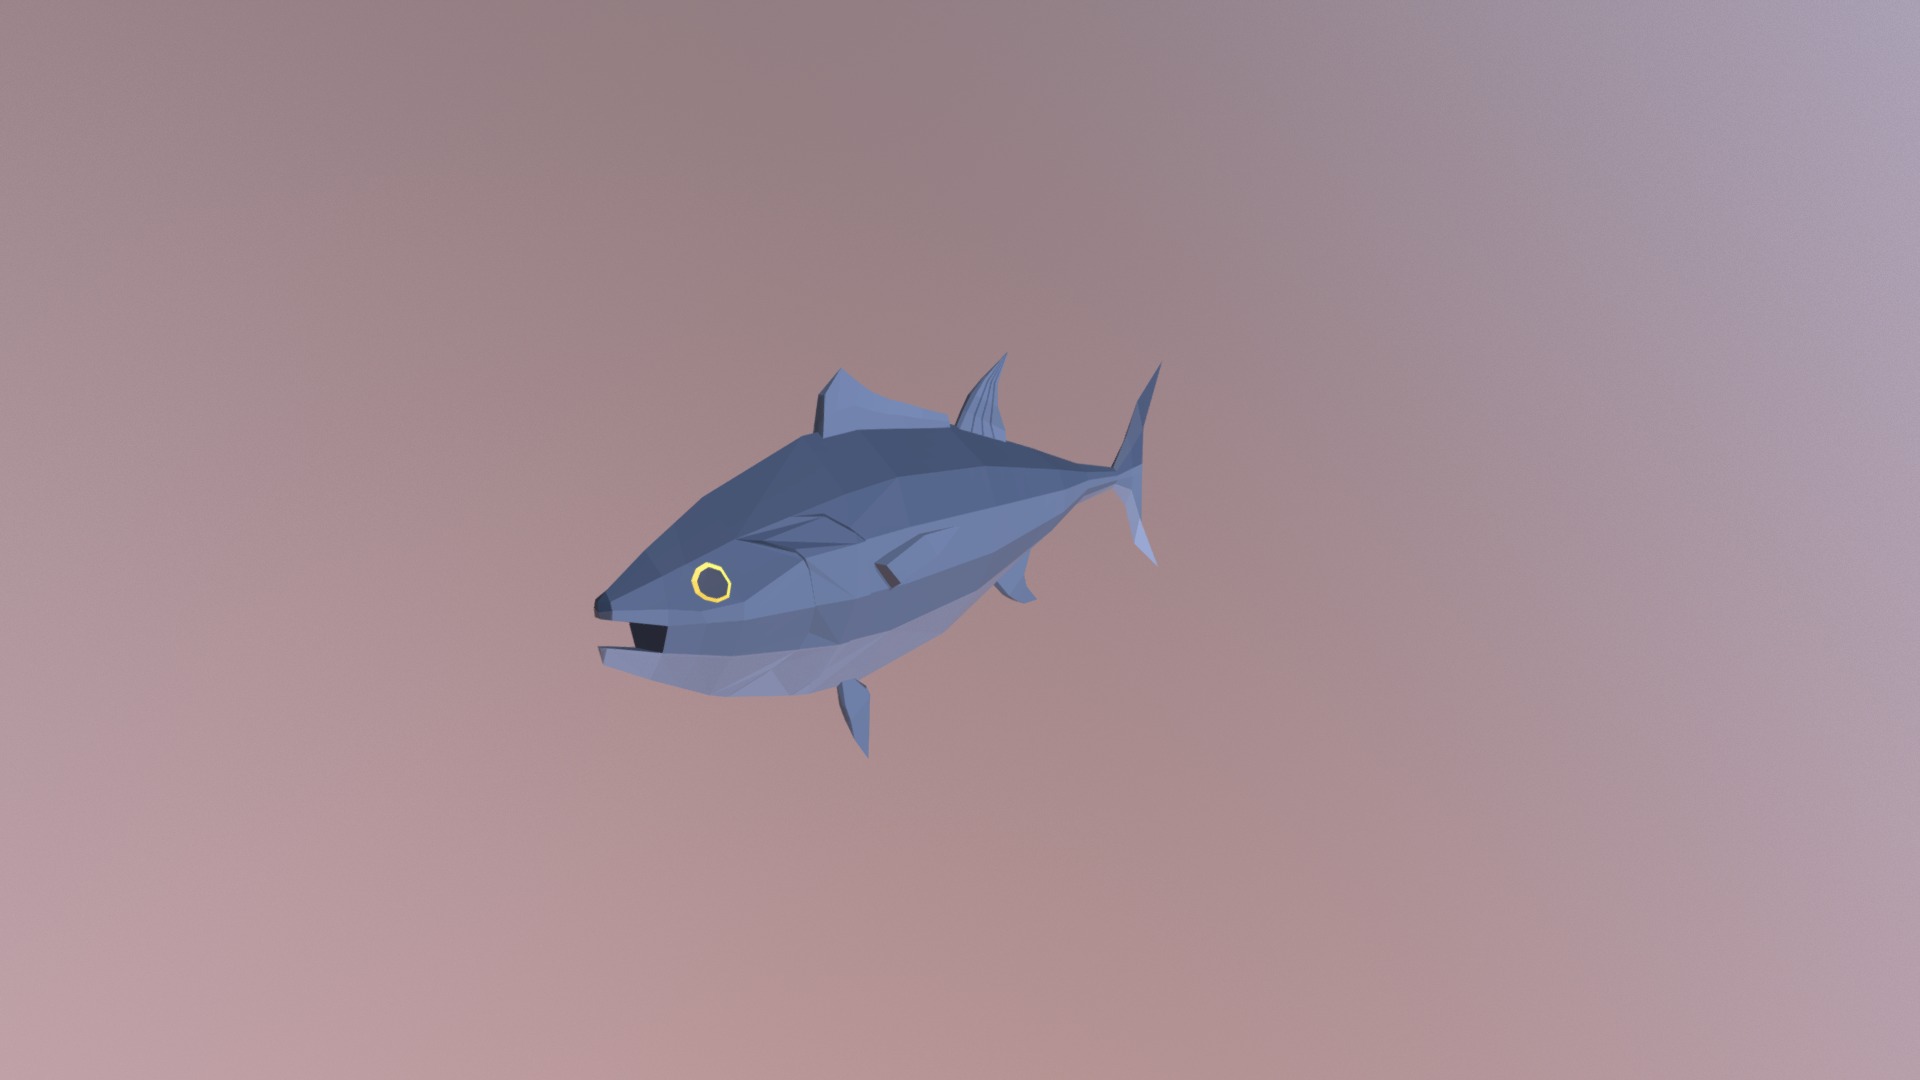 3D model Low Poly Tuna Fish - This is a 3D model of the Low Poly Tuna Fish. The 3D model is about a shark in the sky.